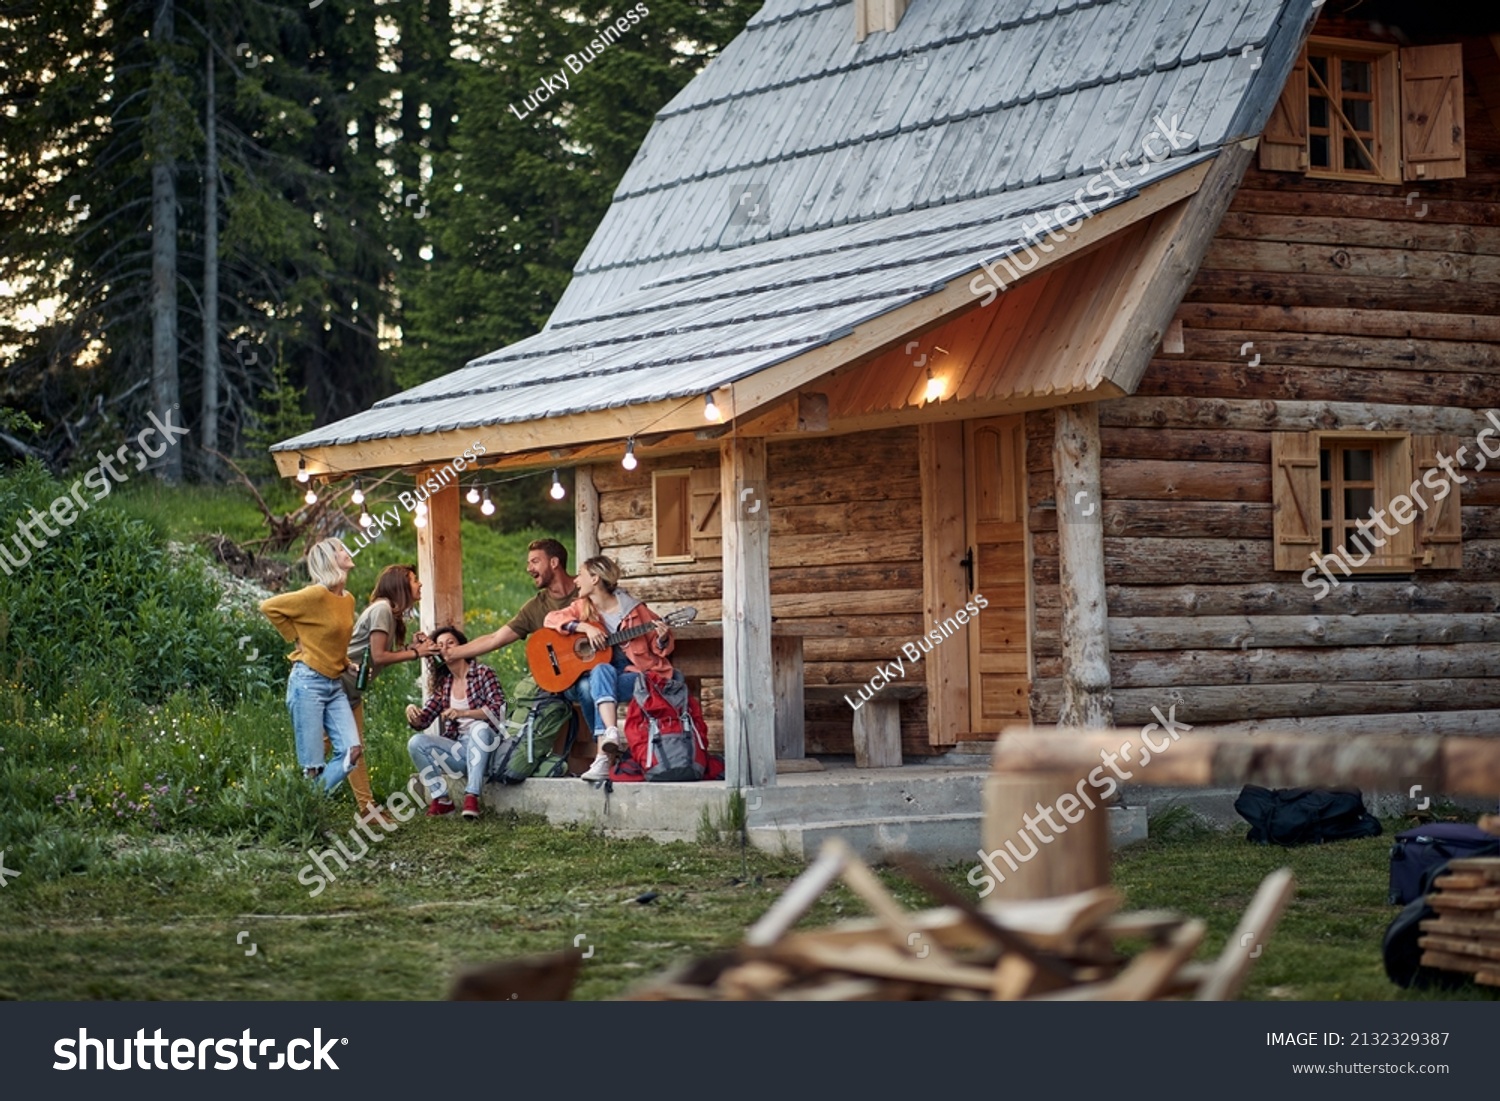 Young cheerful friends in front of wooden cottage on the terrace.  Girl playing guitar. Summertime garden celebration and fun. Friends, togetherness, fun, celebration concept. #2132329387